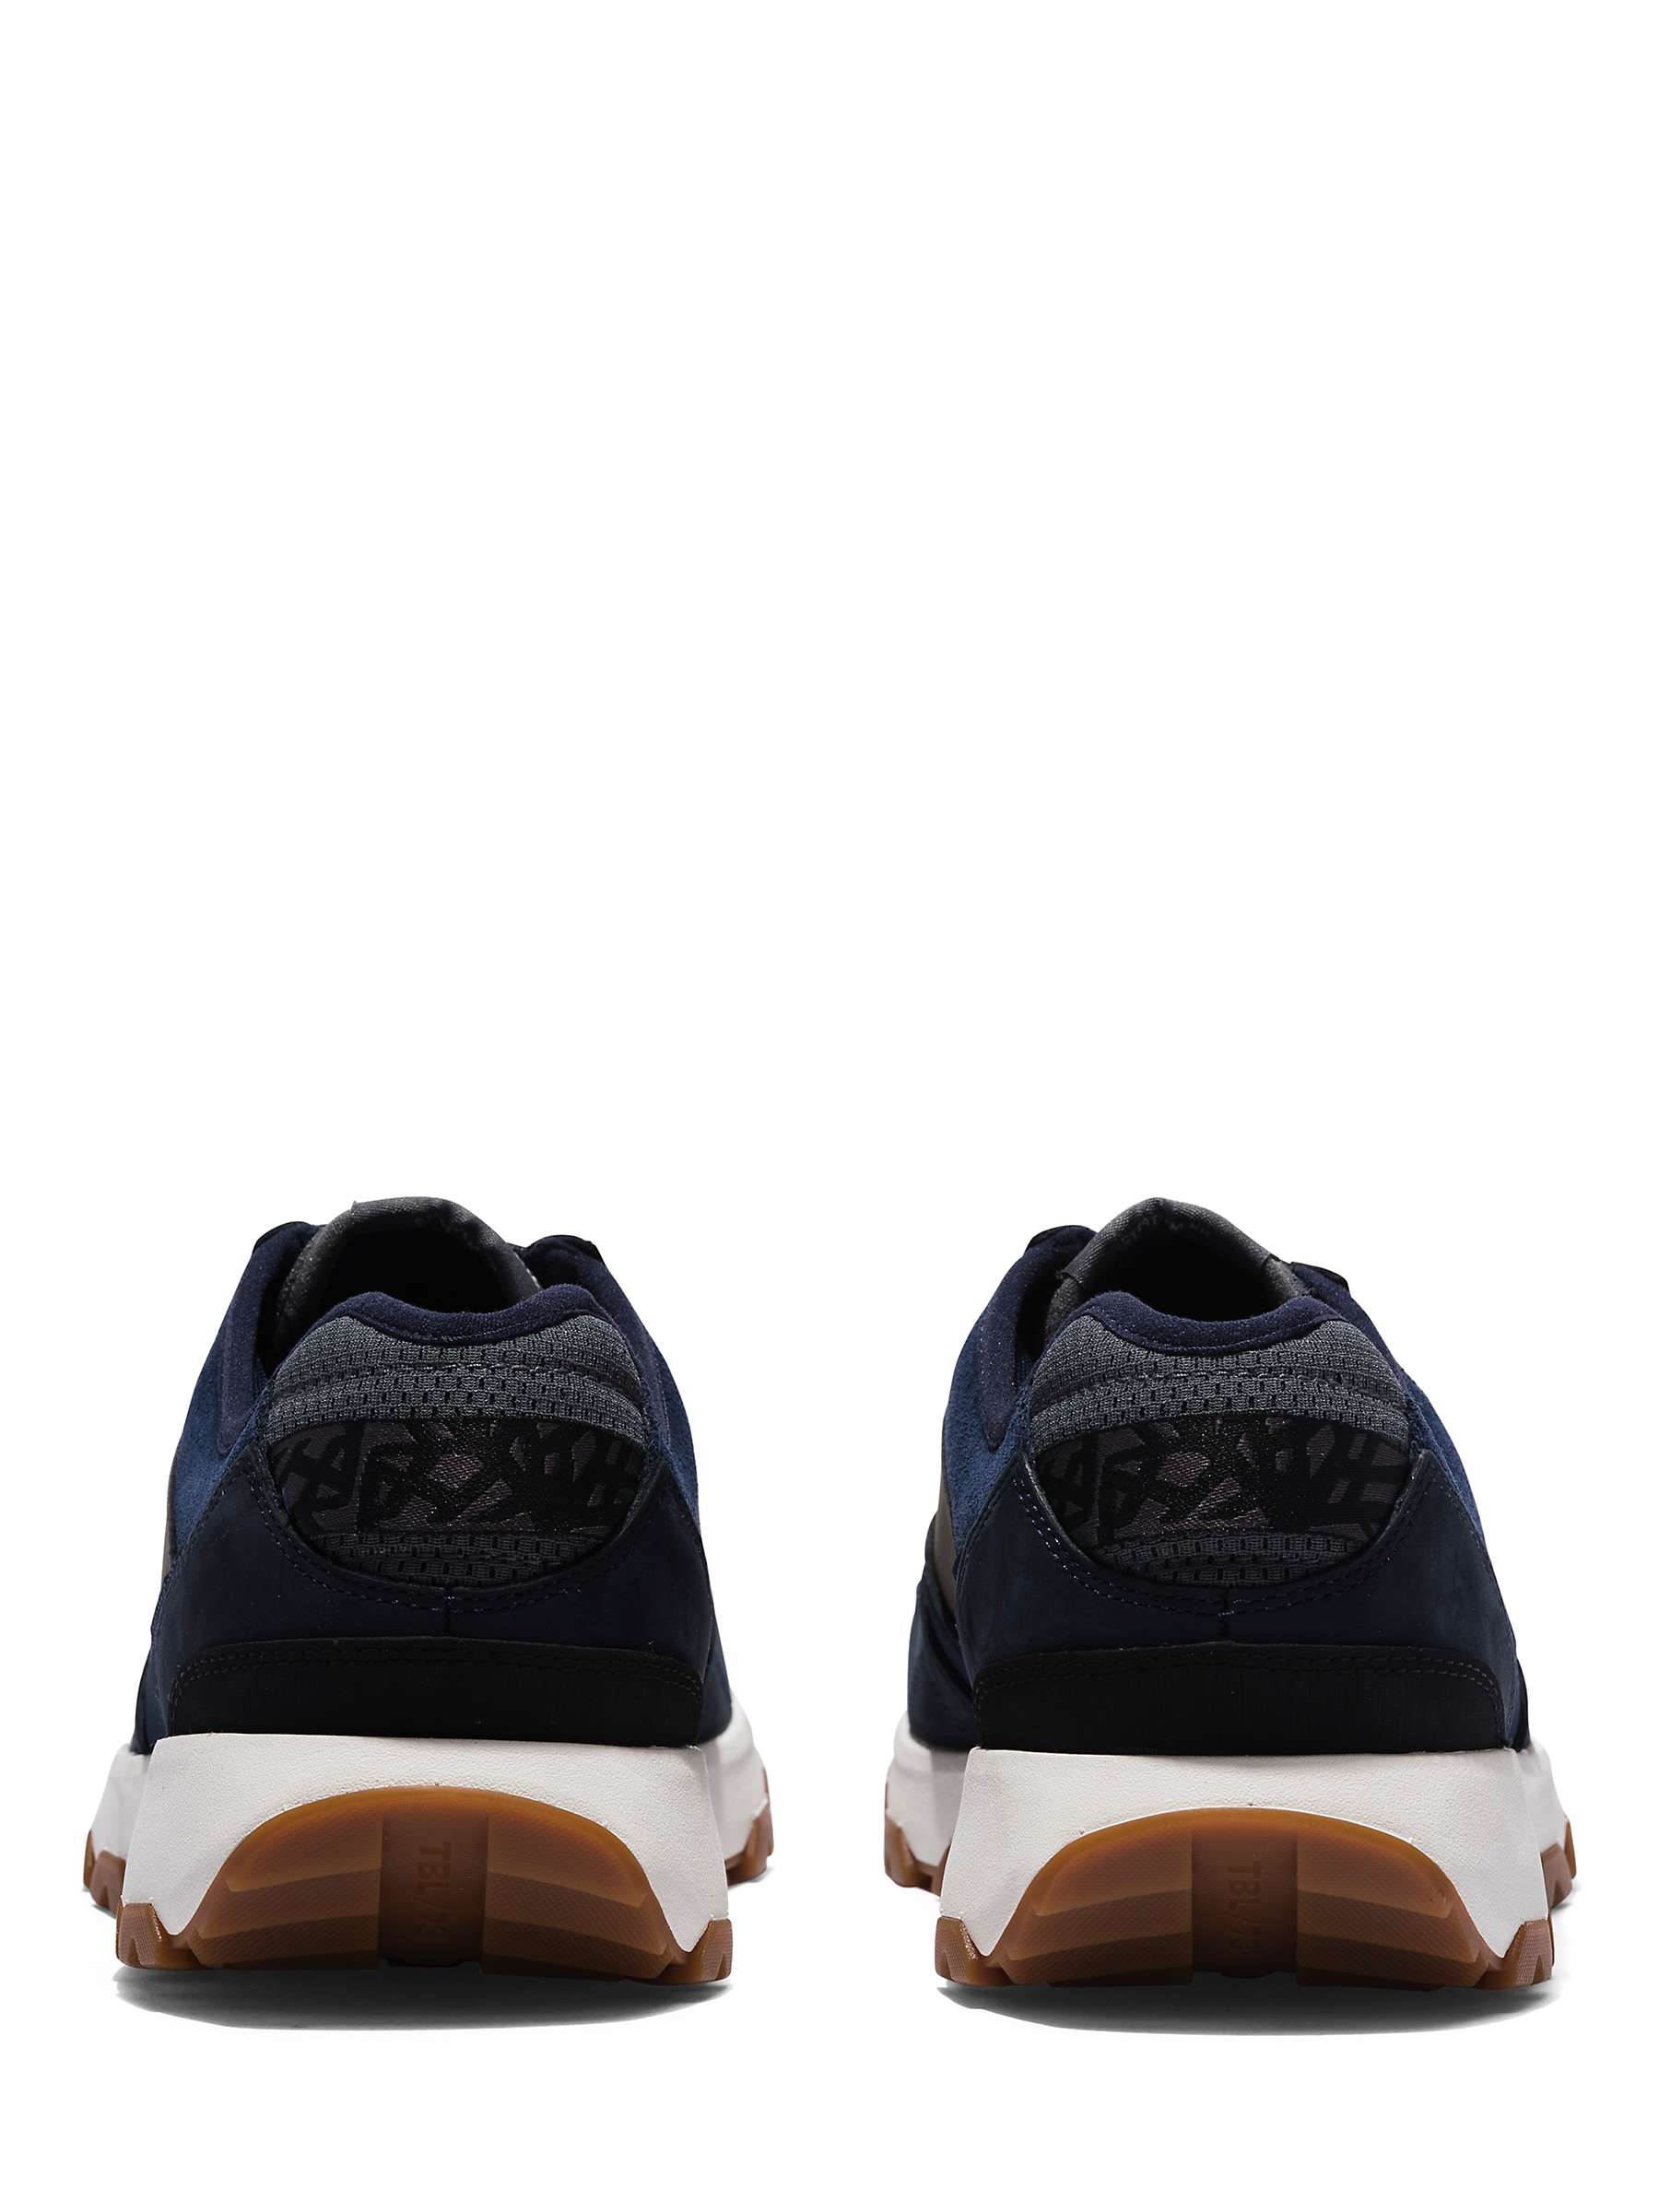 Buy Timberland Windsor Park Suede Trainers Online at johnlewis.com